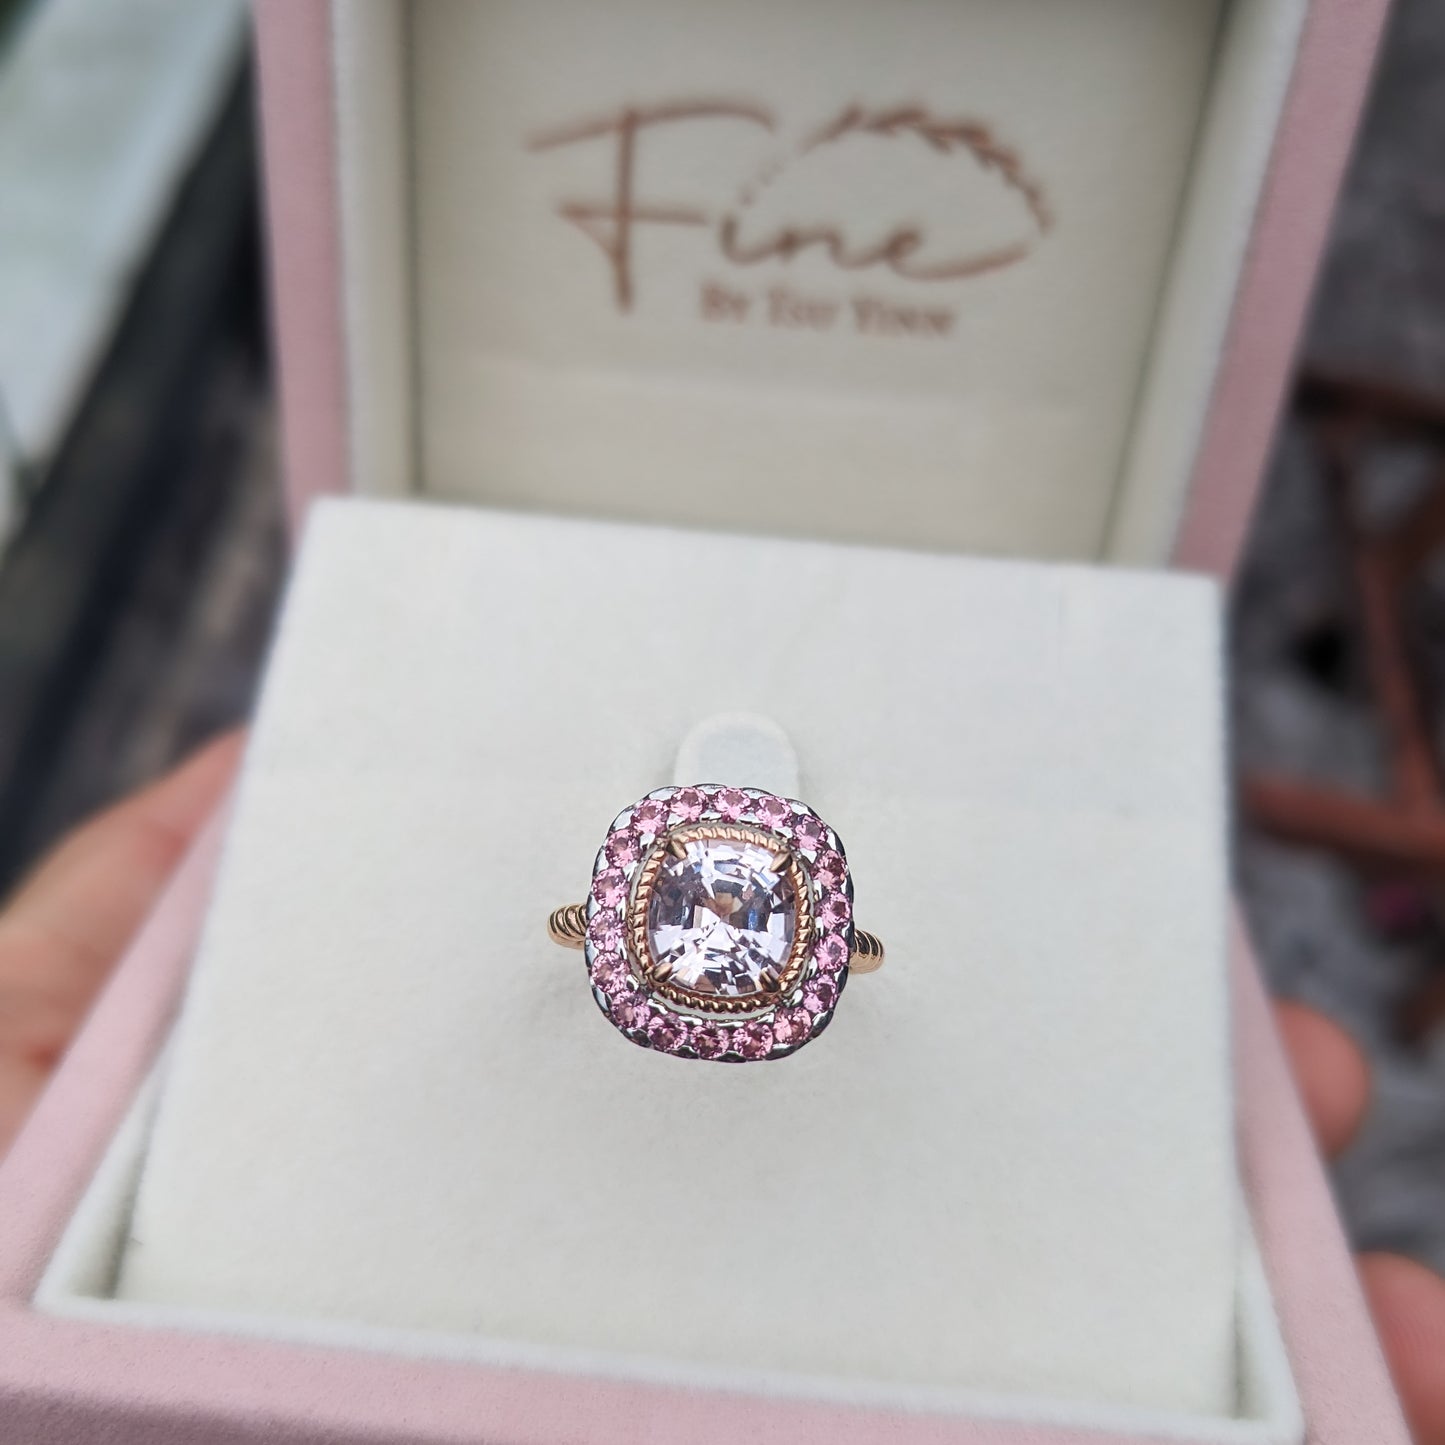 Rebecca Ring with White Spinel and Pink Spinel